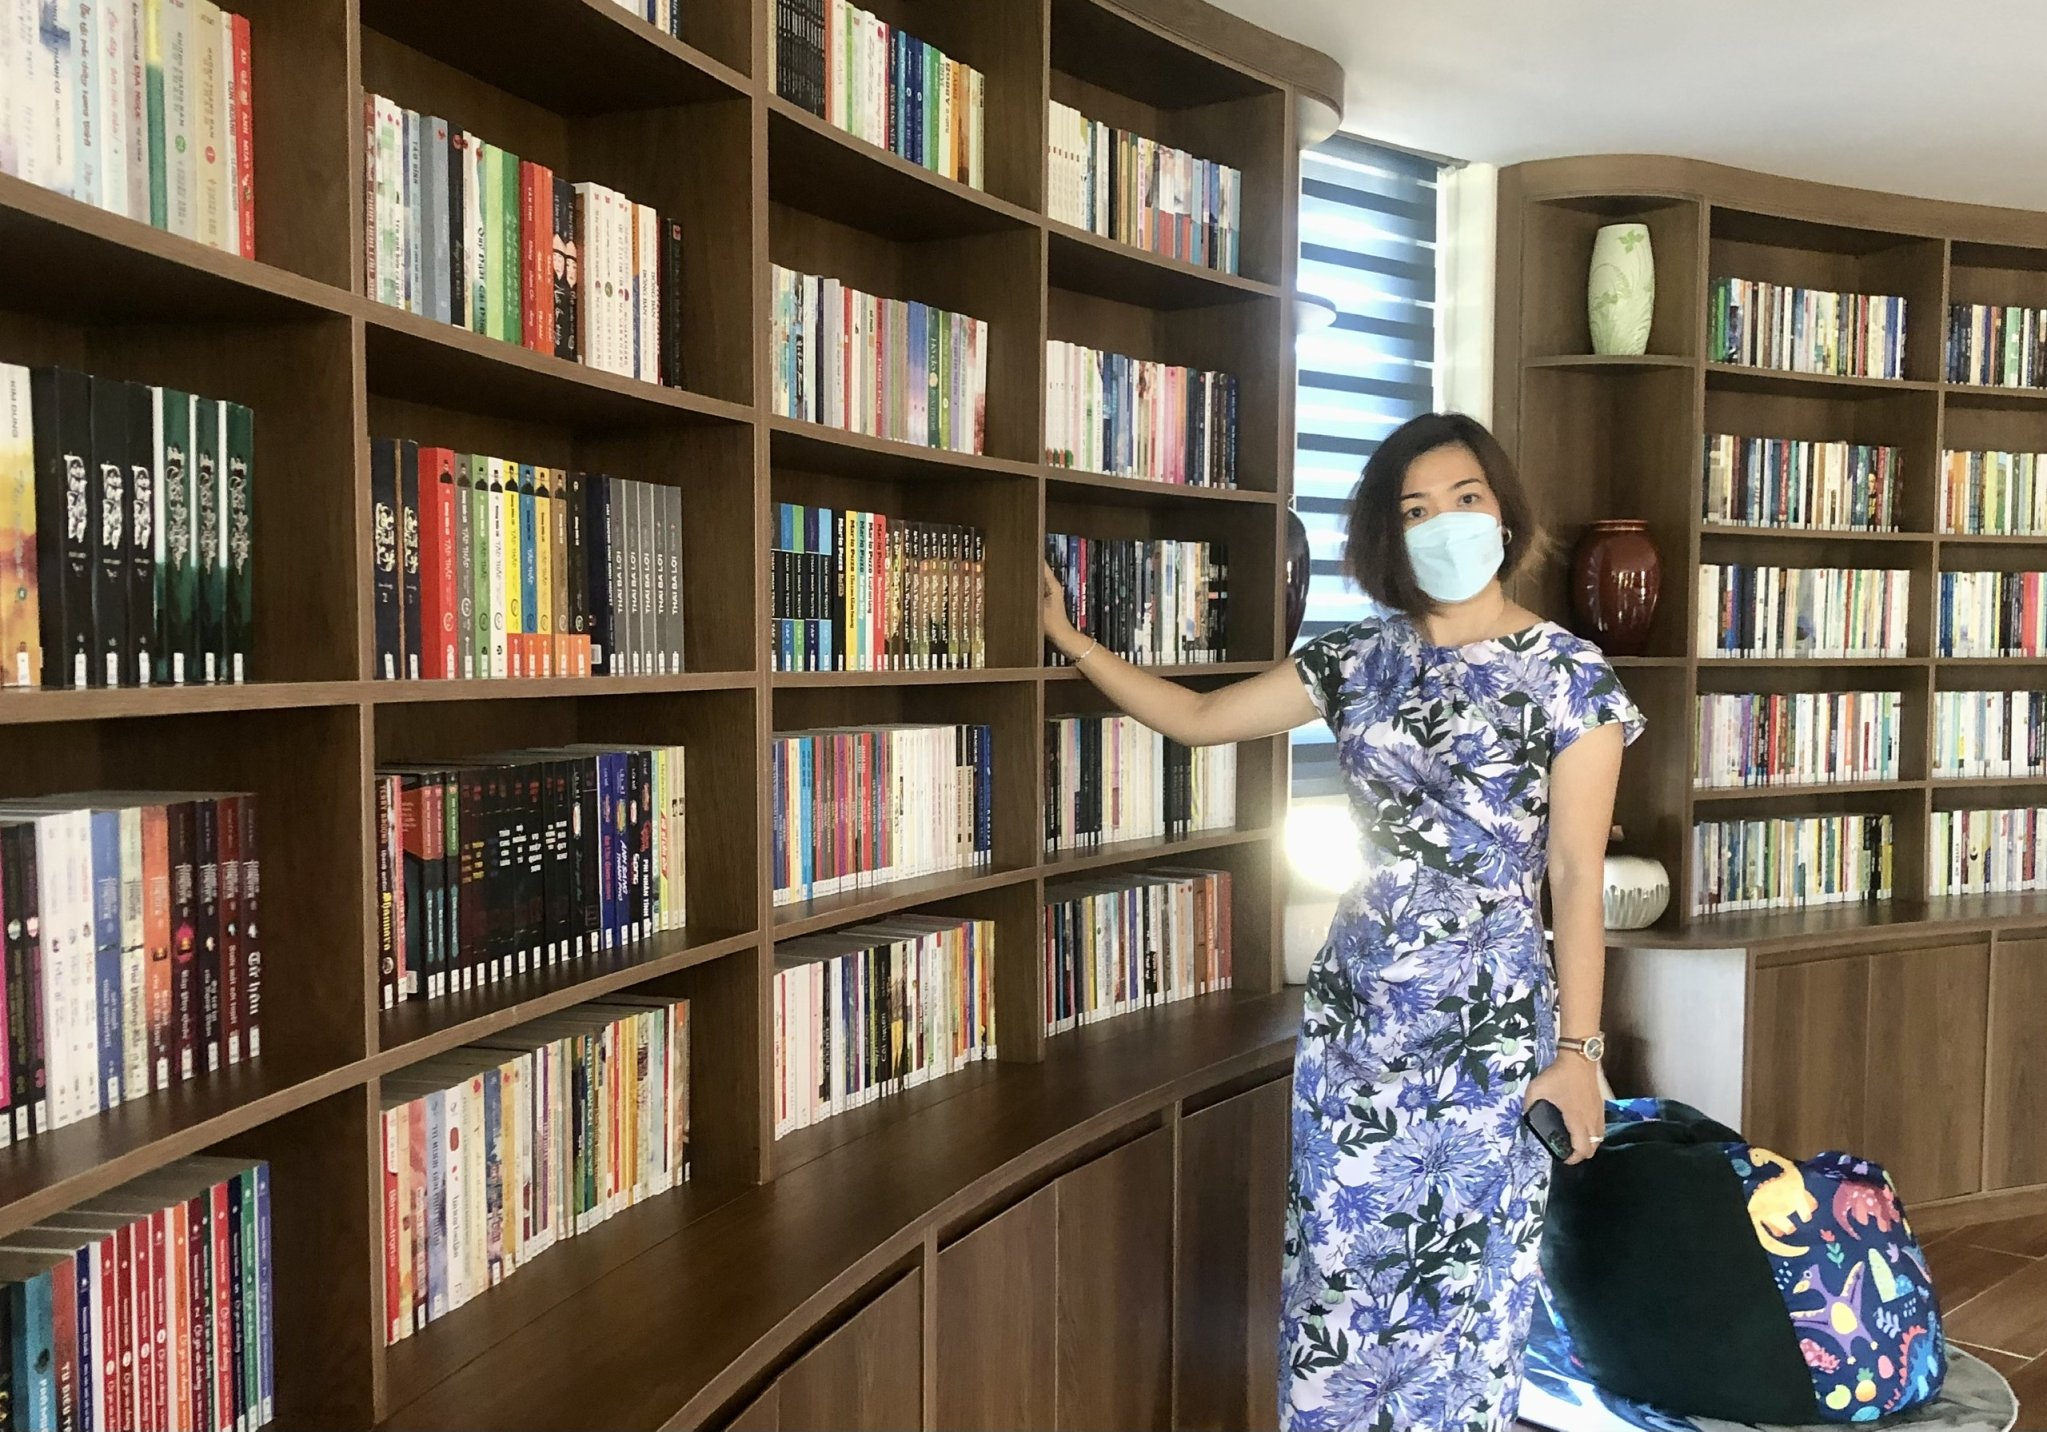 Mrs. Tong Thu Huyen, the operator of the Olive Gallery Danang, introducing the library space.